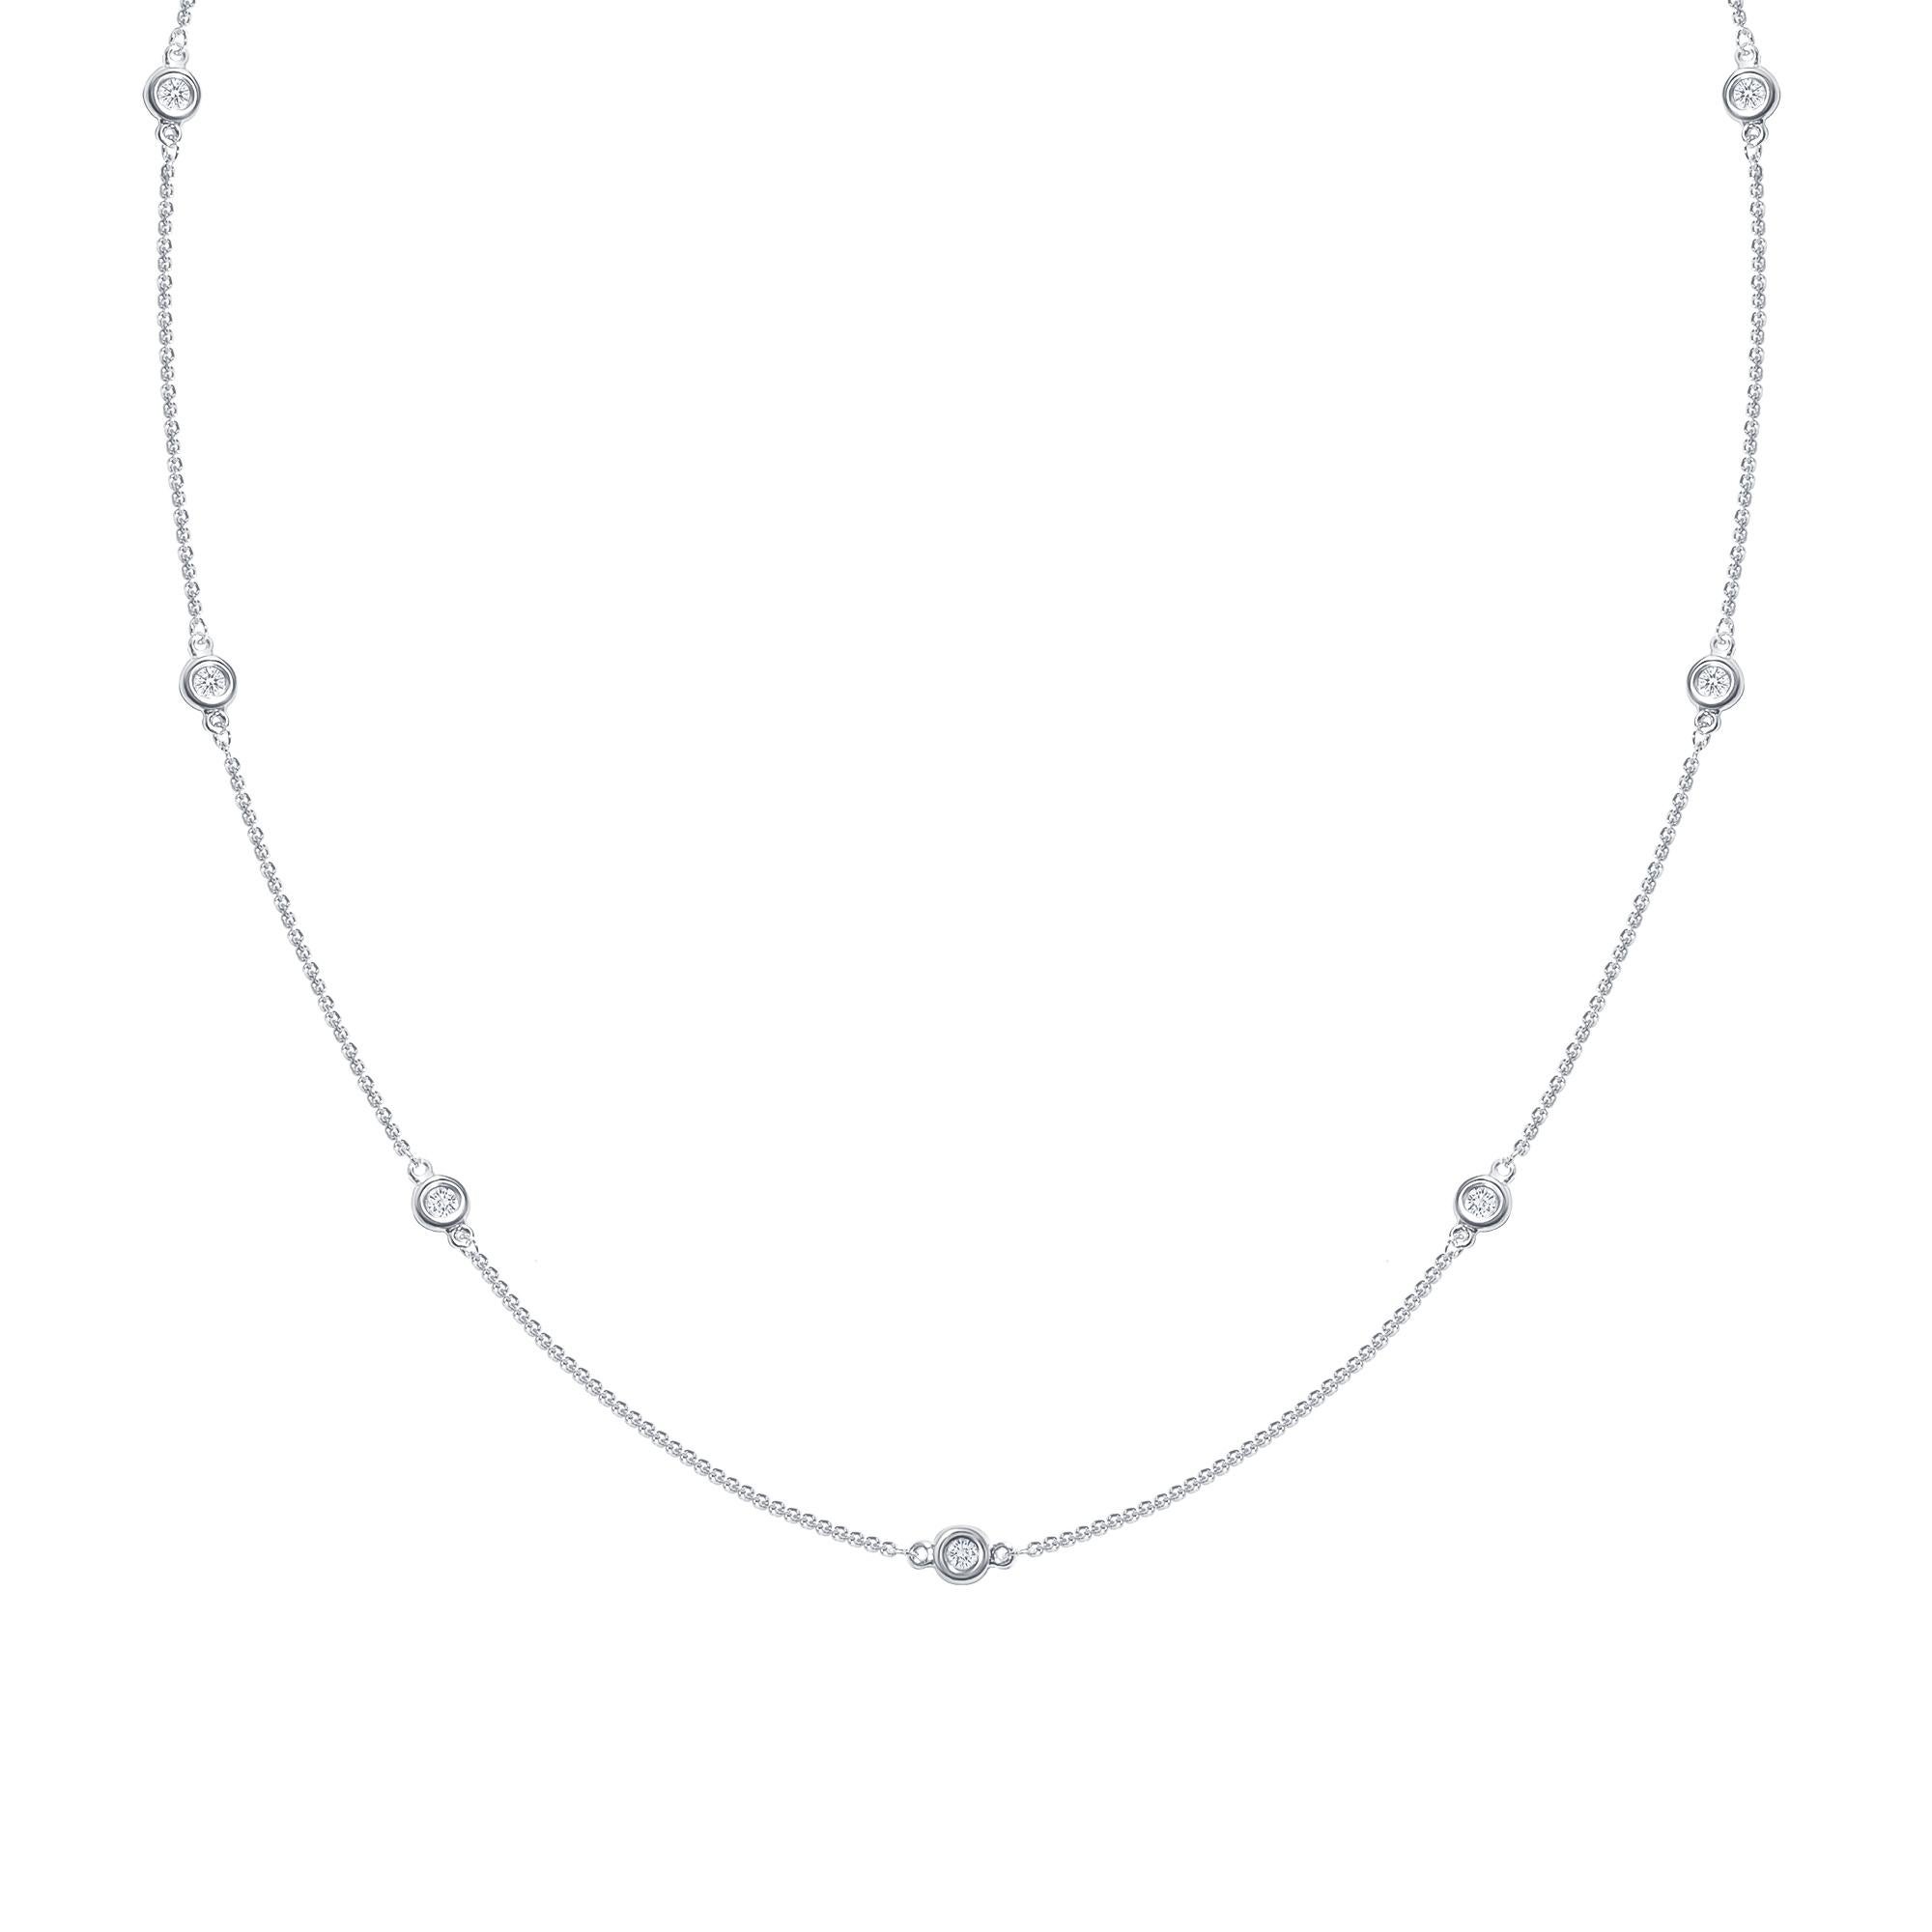 Eight elegant round diamonds set in a bezel setting along a 14k gold chain necklace.

Gold: 14K Gold
Number of Diamonds: Eight
Gold Color: White Gold
Carat: 1 Carat
Necklace Length: 22 Inches
Diamond Clarity: VS
Diamond Color: F
Chain Type: